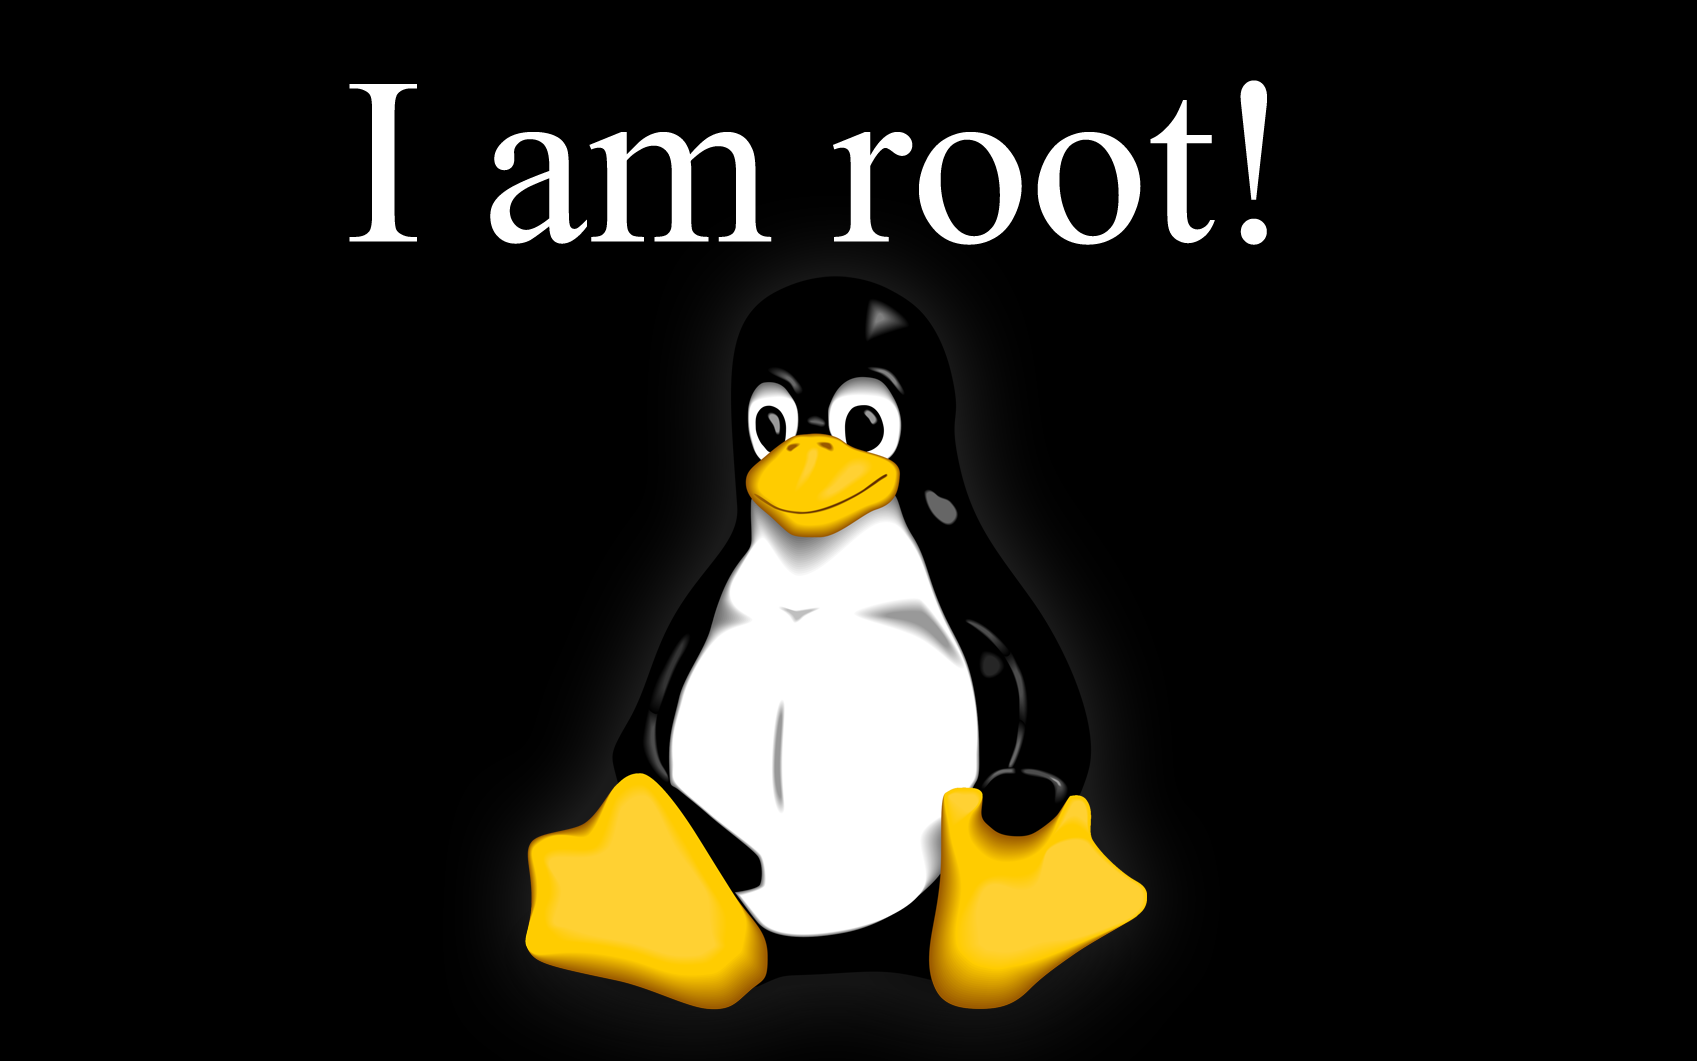 How to create a new user in Linux and add it to a group